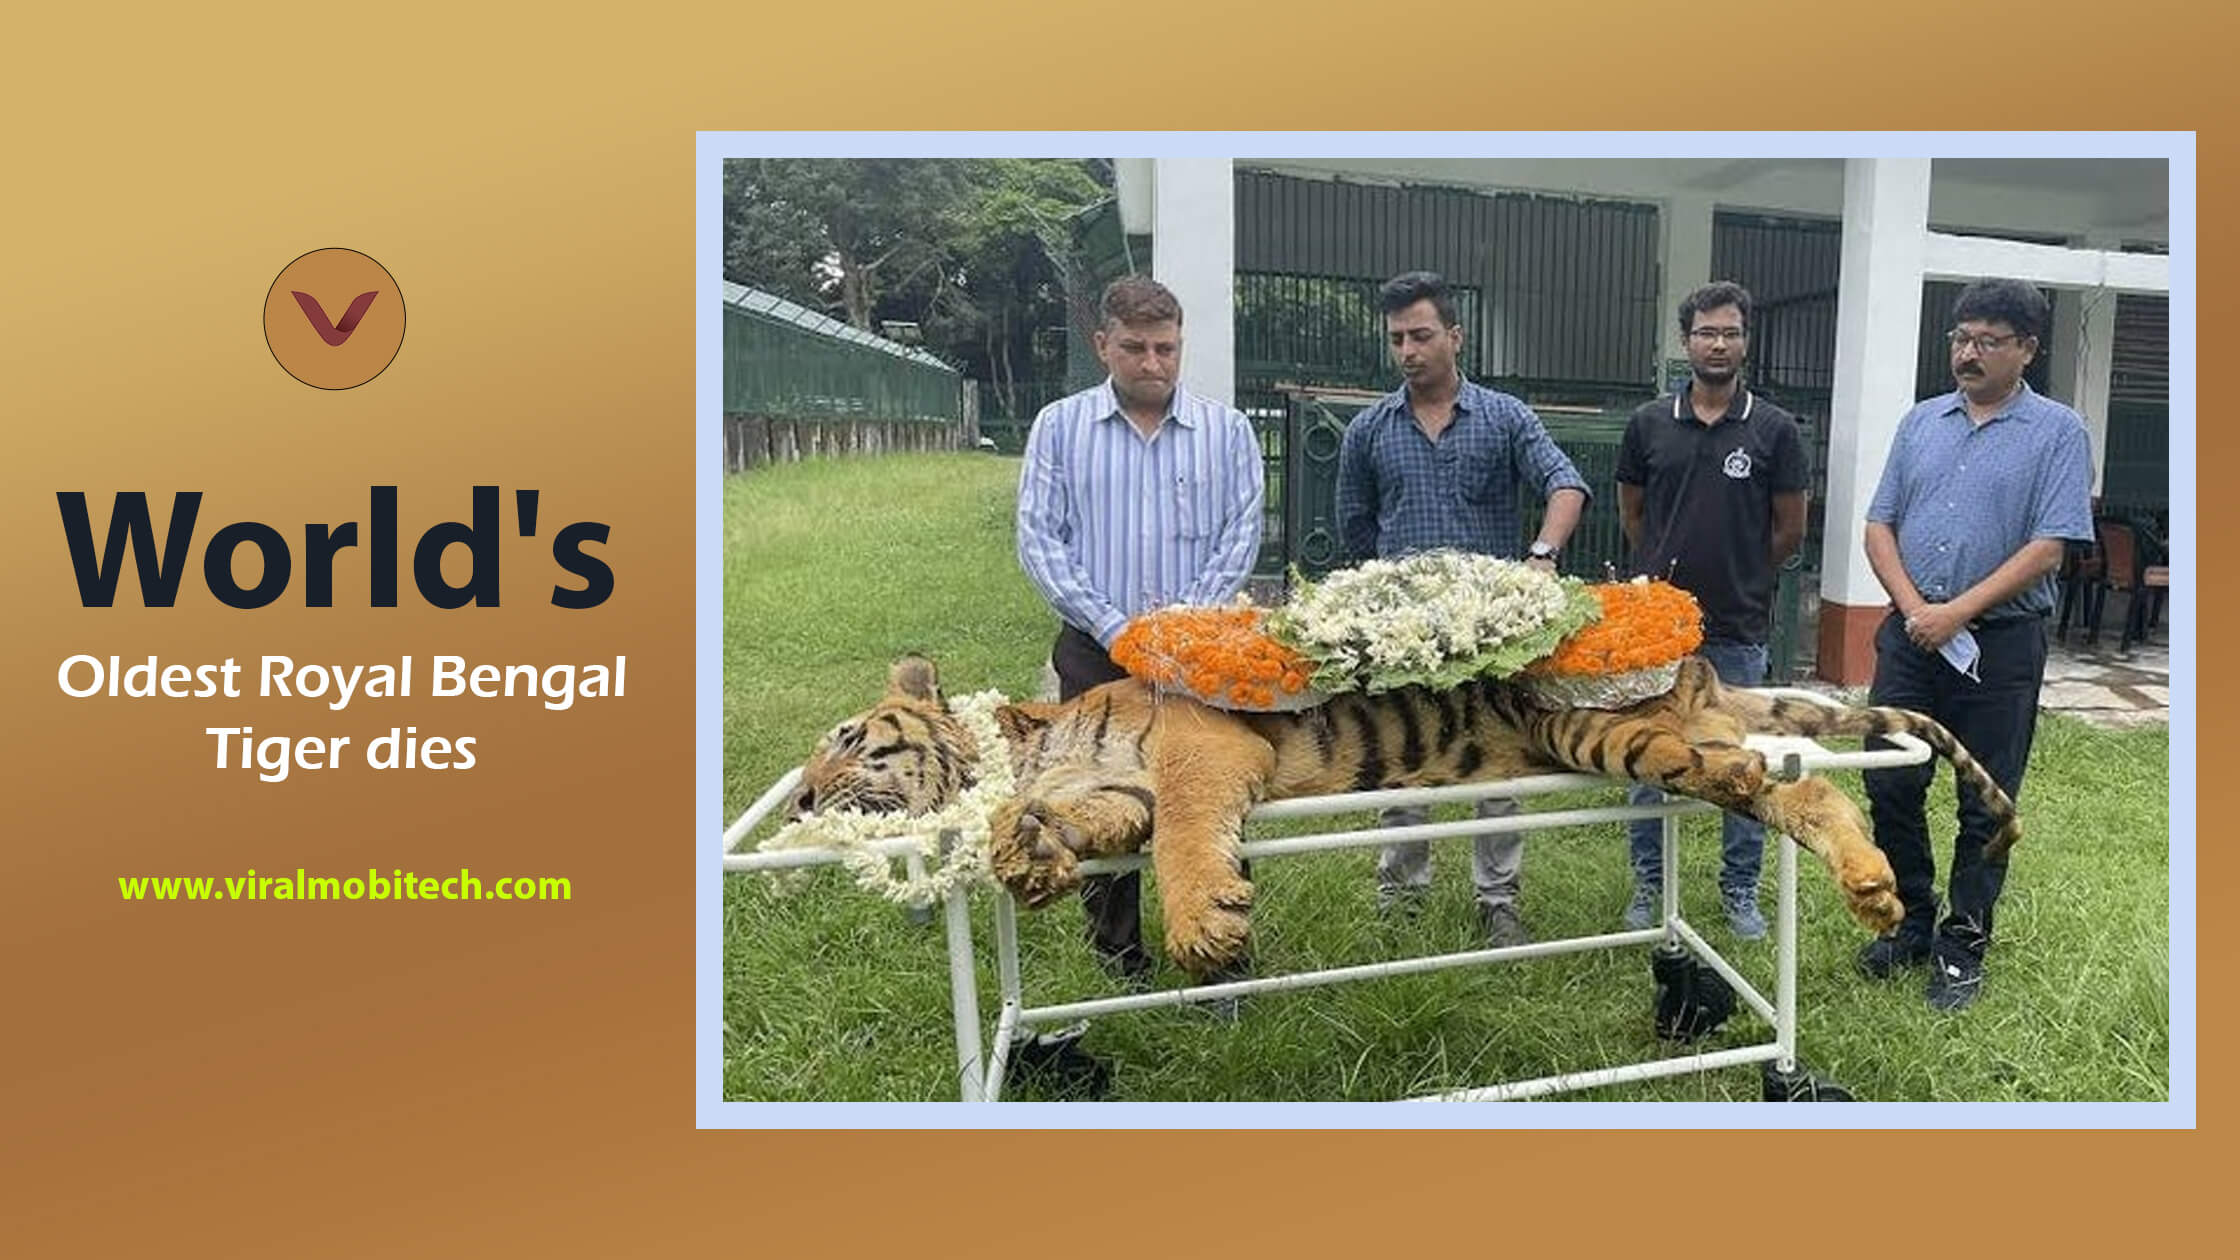 Raja, the tiger was no more with us